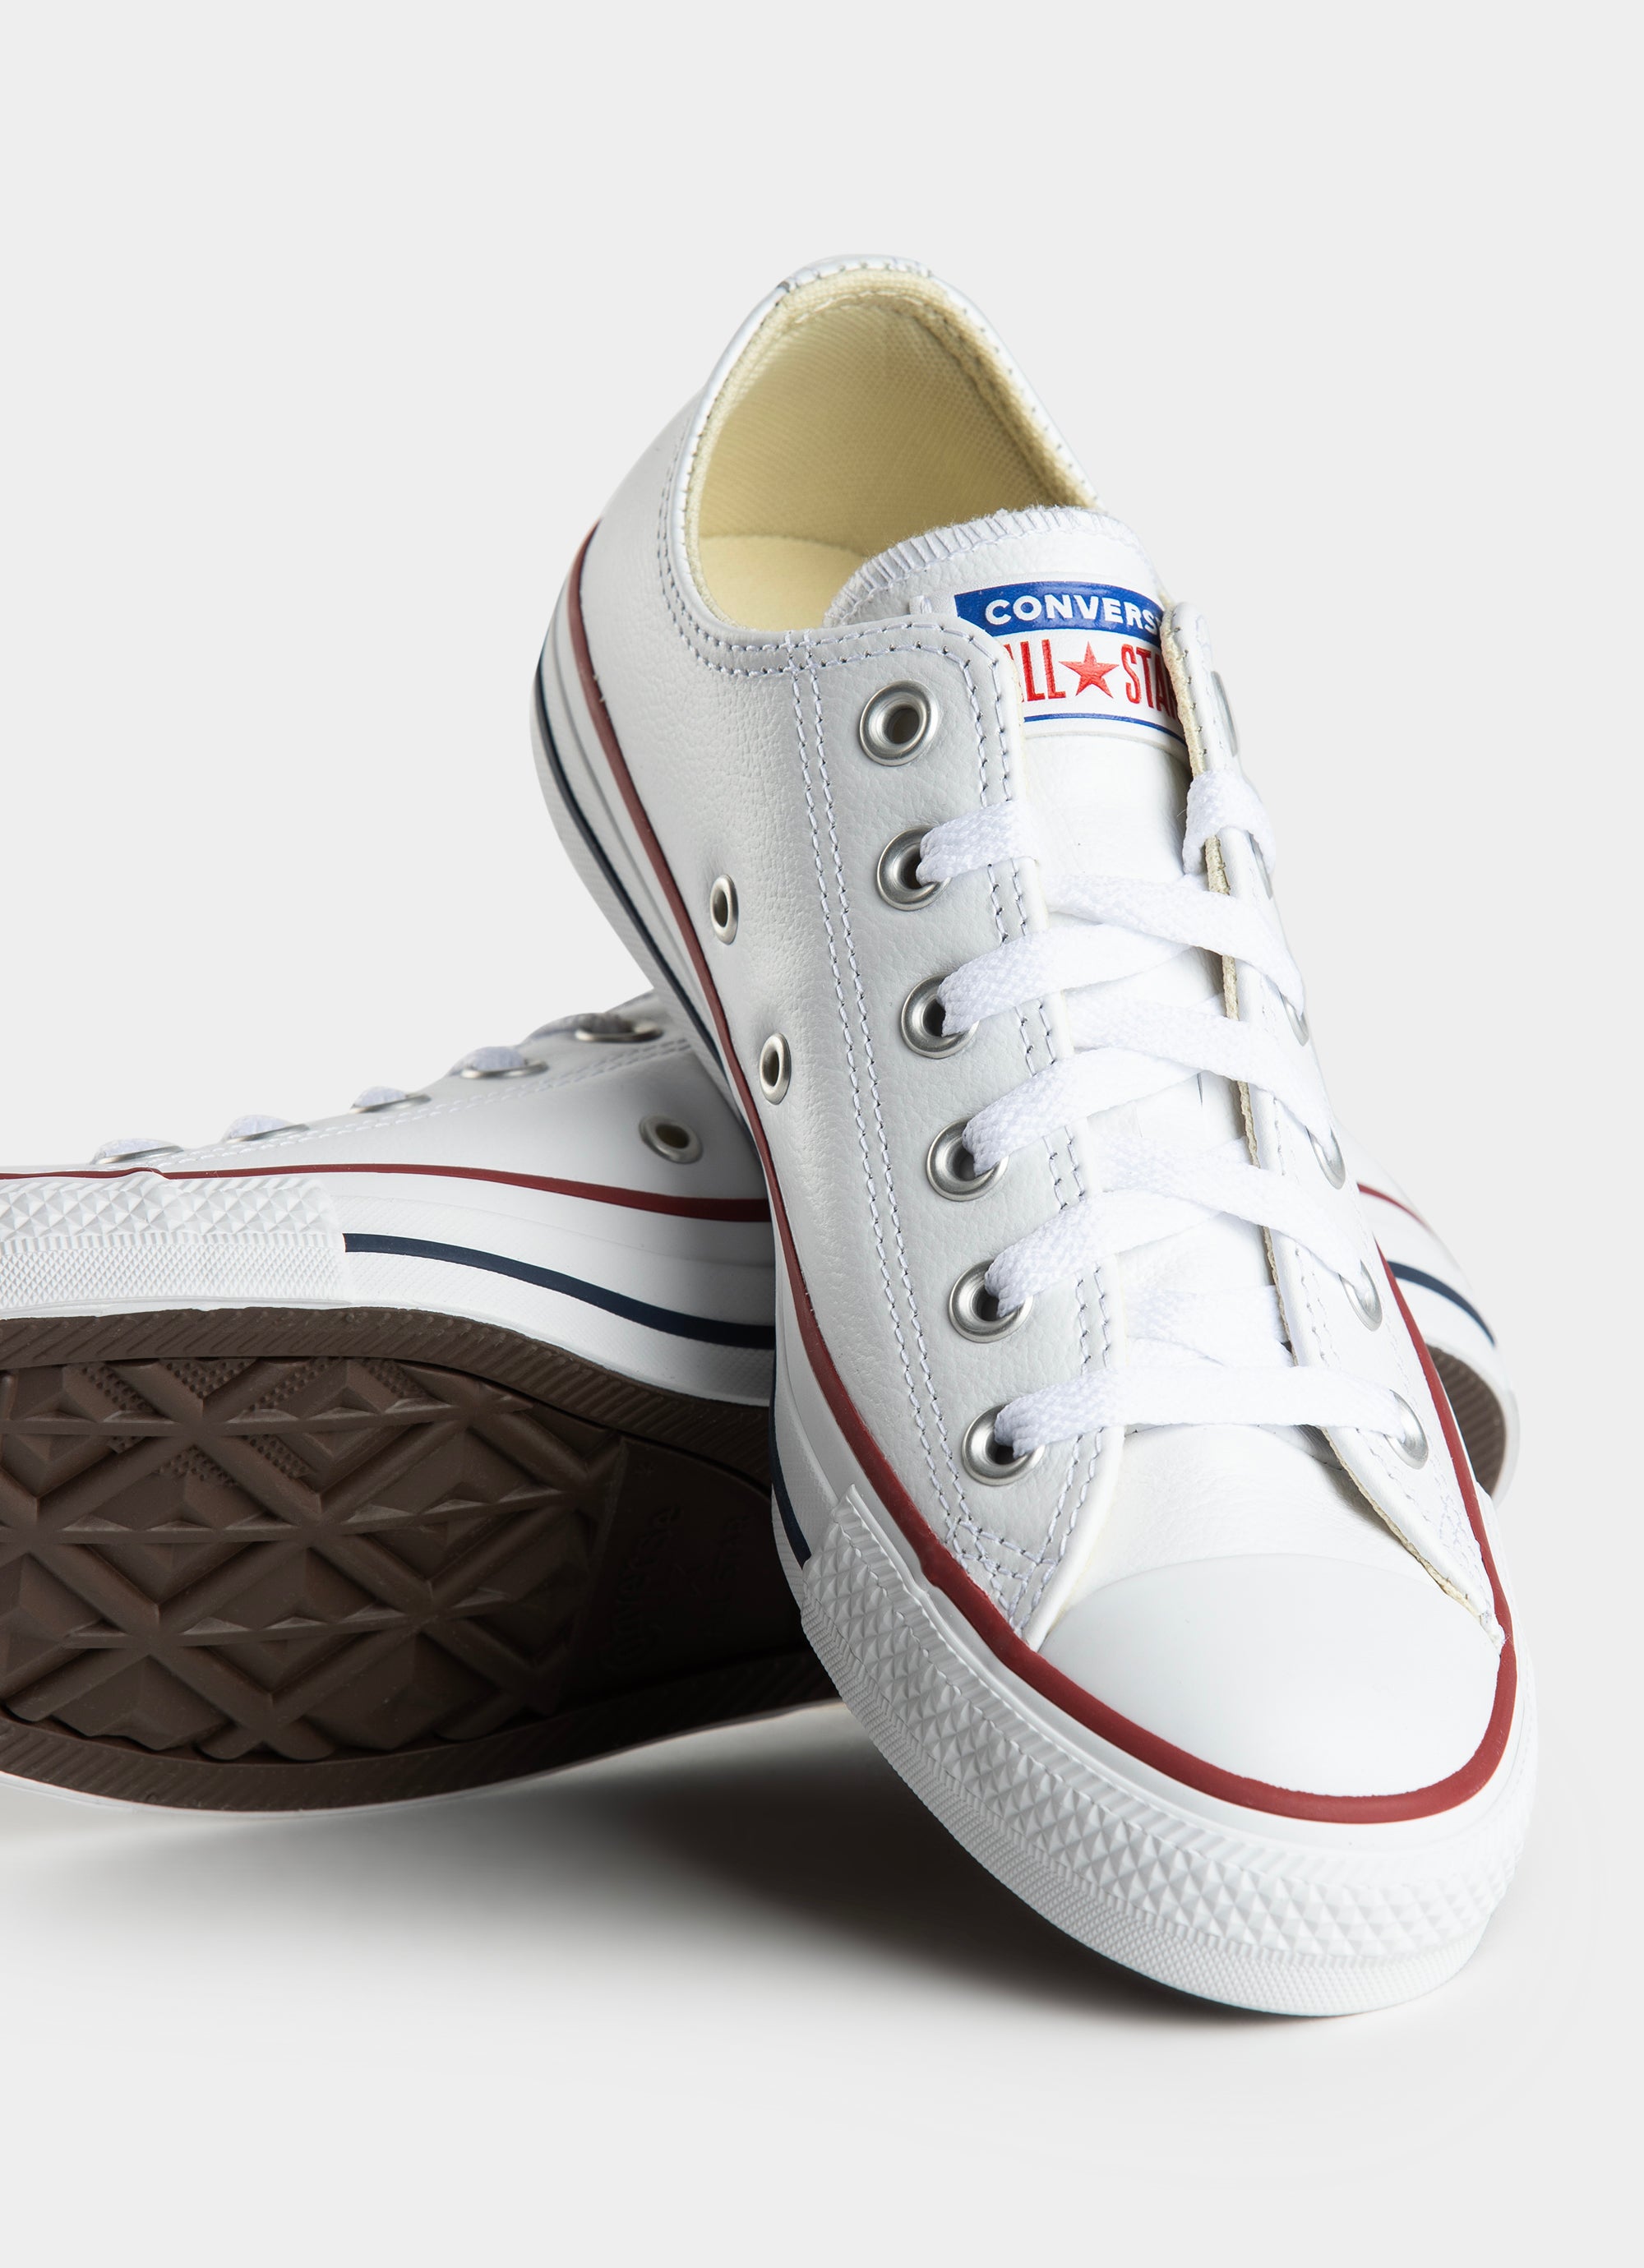 Buy Converse Chuck Taylor All Star Sneakers | White | 6 UK at Amazon.in